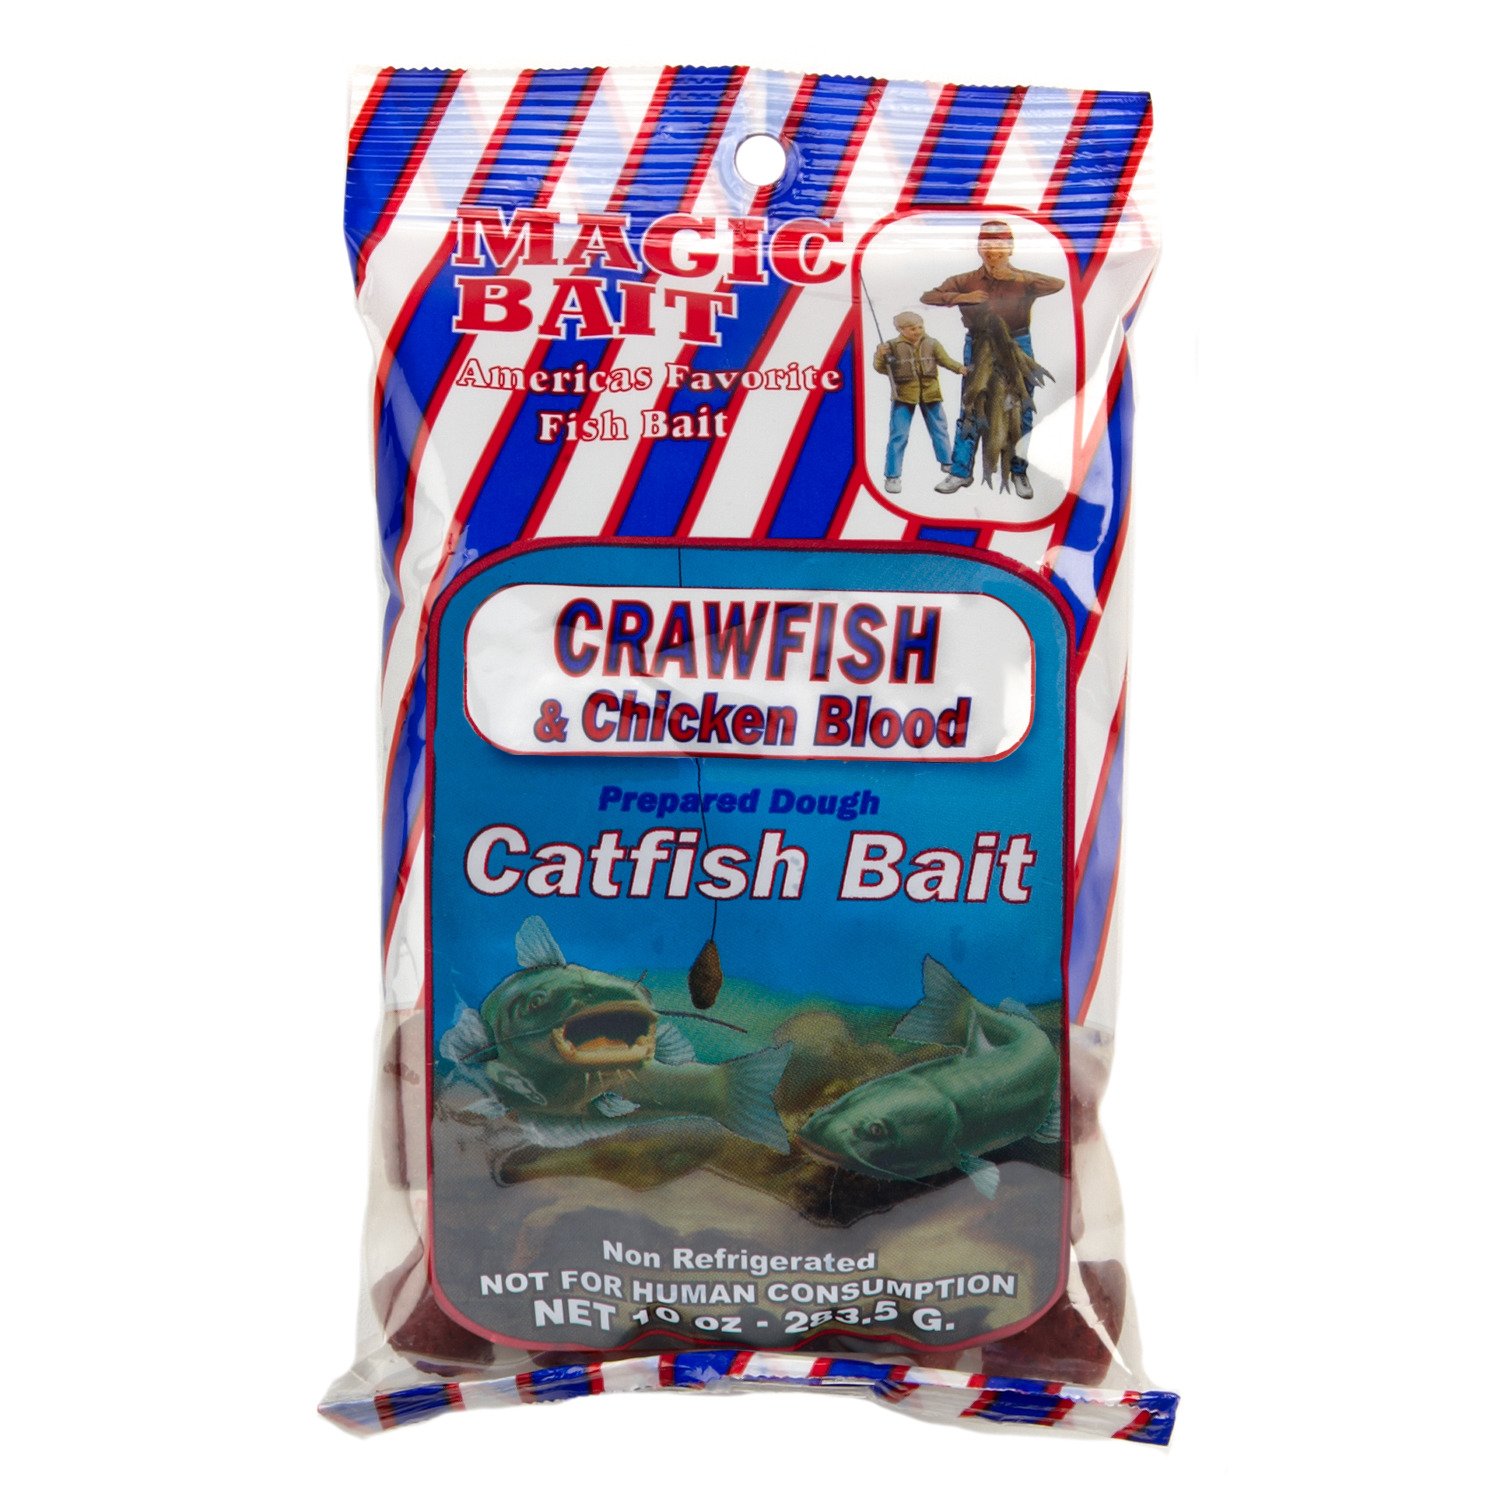 Academy Sports + Outdoors Magic Bait 10 oz. Crawfish and Chicken